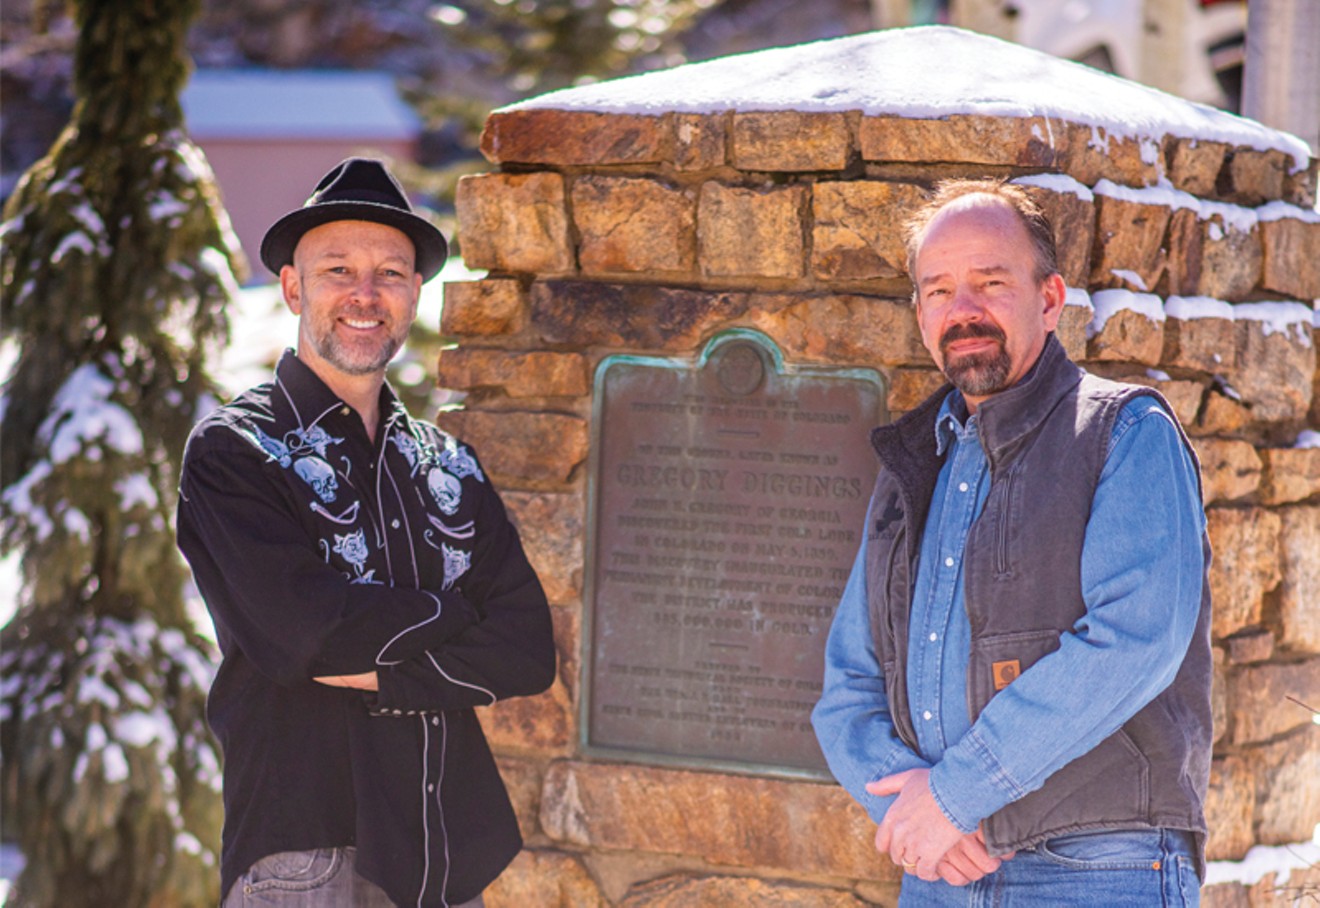 Jeremy Fey, mayor of Central City (left), and David Spellman, mayor of Black Hawk, near the site where gold was found just over 150 years ago in the future Gilpin County.